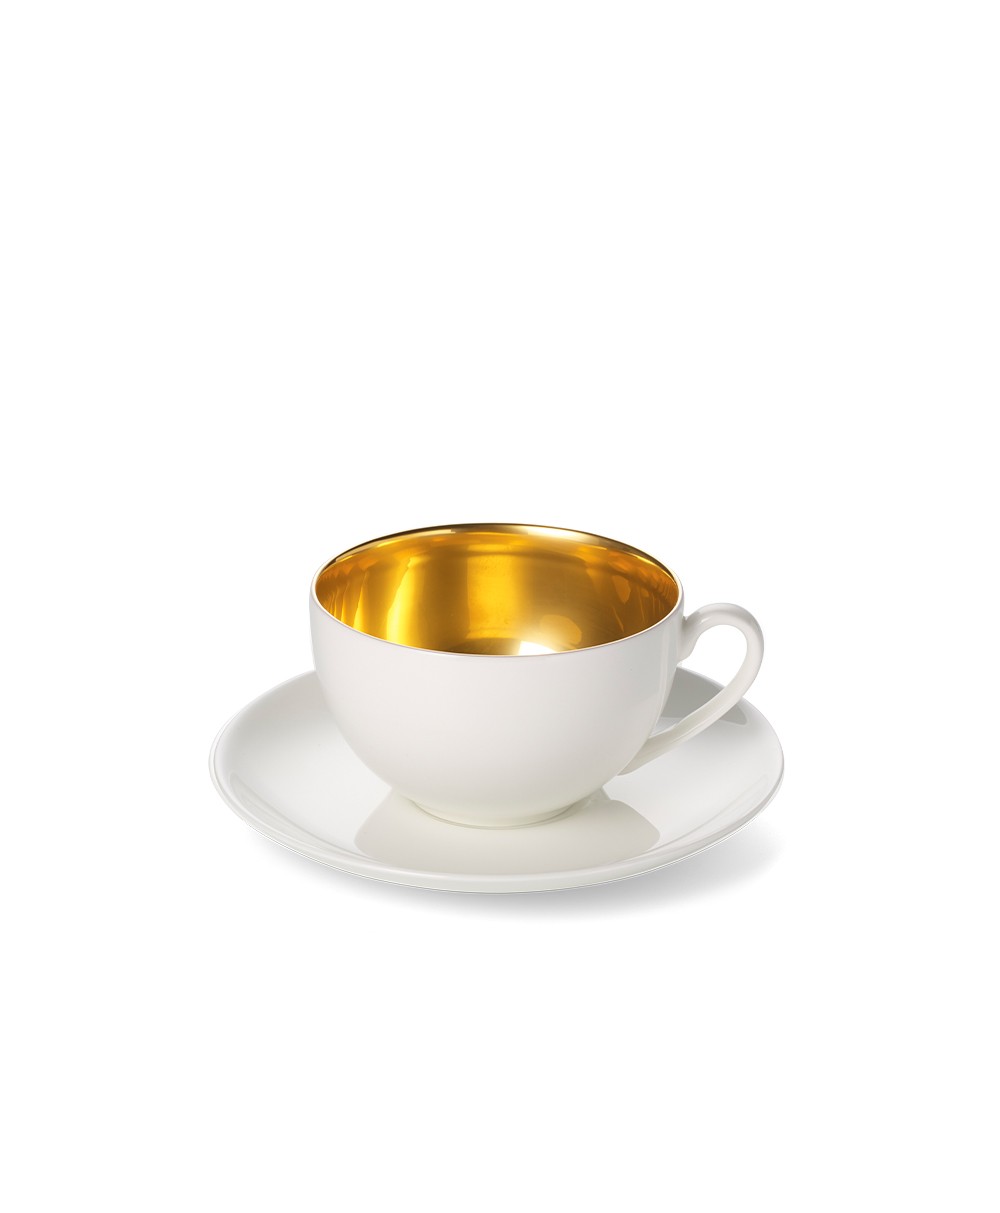 x Marni Anemone Milk set of 2 cappuccino cups and saucers in multicoloured  - Serax